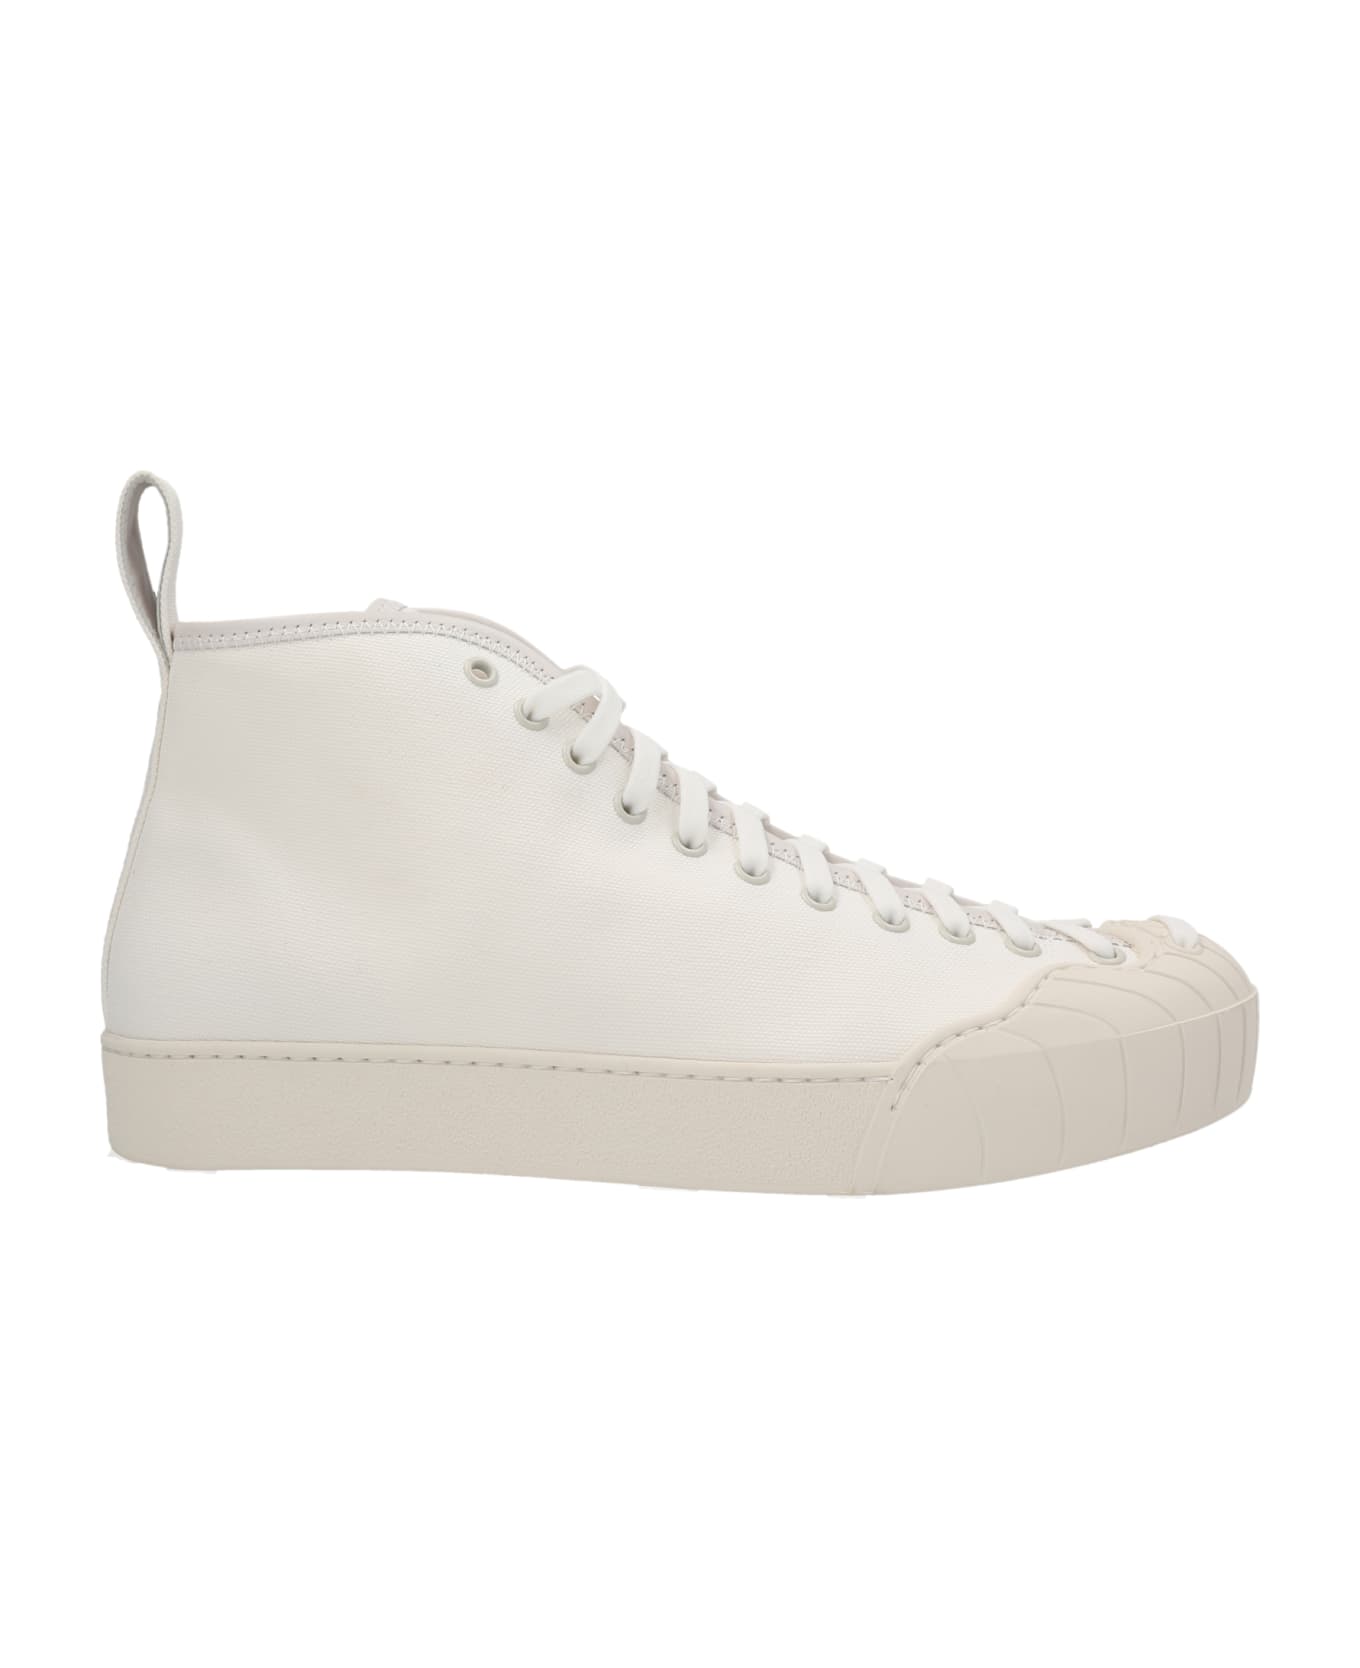 Sunnei 'easy Shoes' Sneakers - White